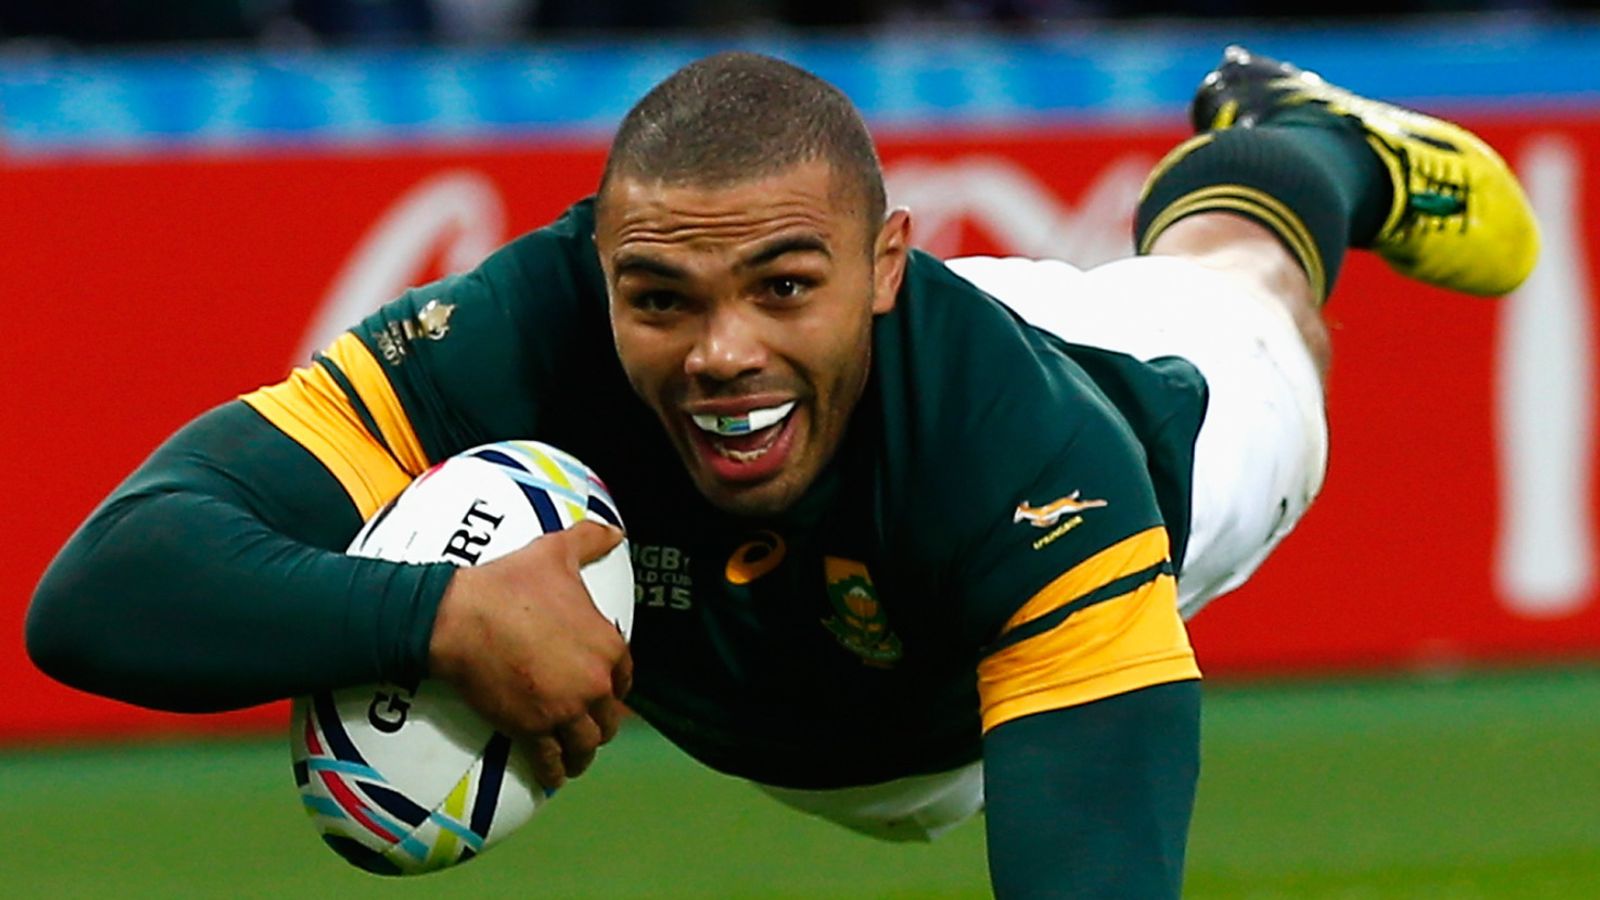 Bryan Habana on Will Greenwood's podcast | Rugby Union News | Sky Sports